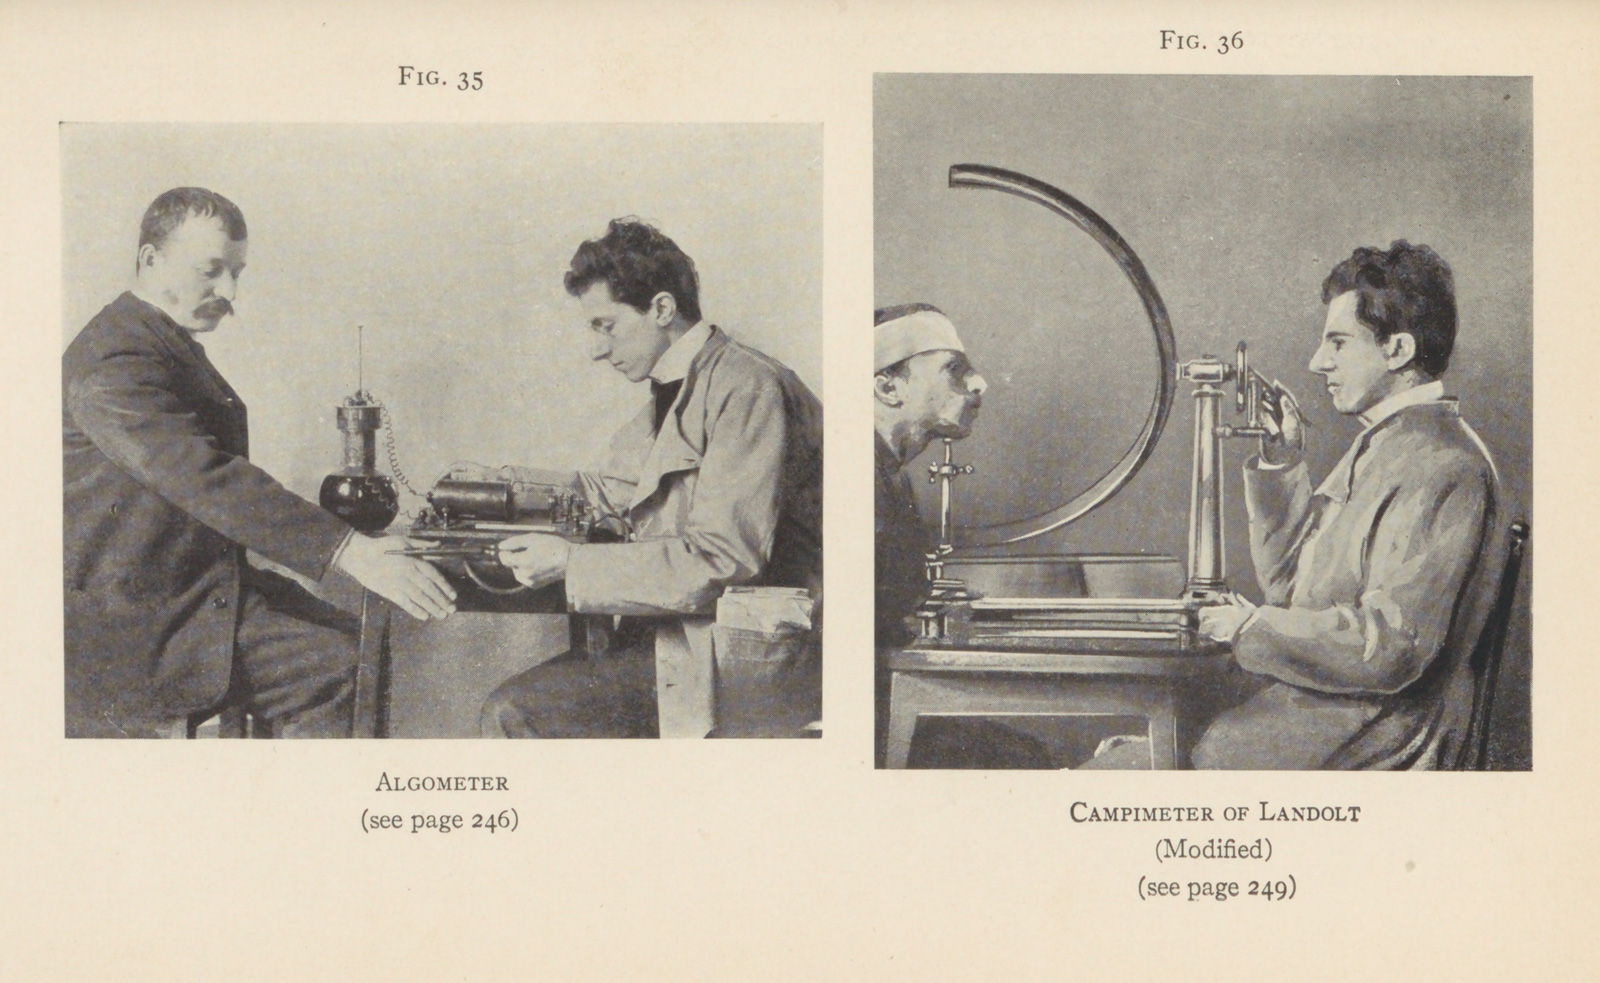 Side-by-side photographs of a white man measuring another white man with an apparatus